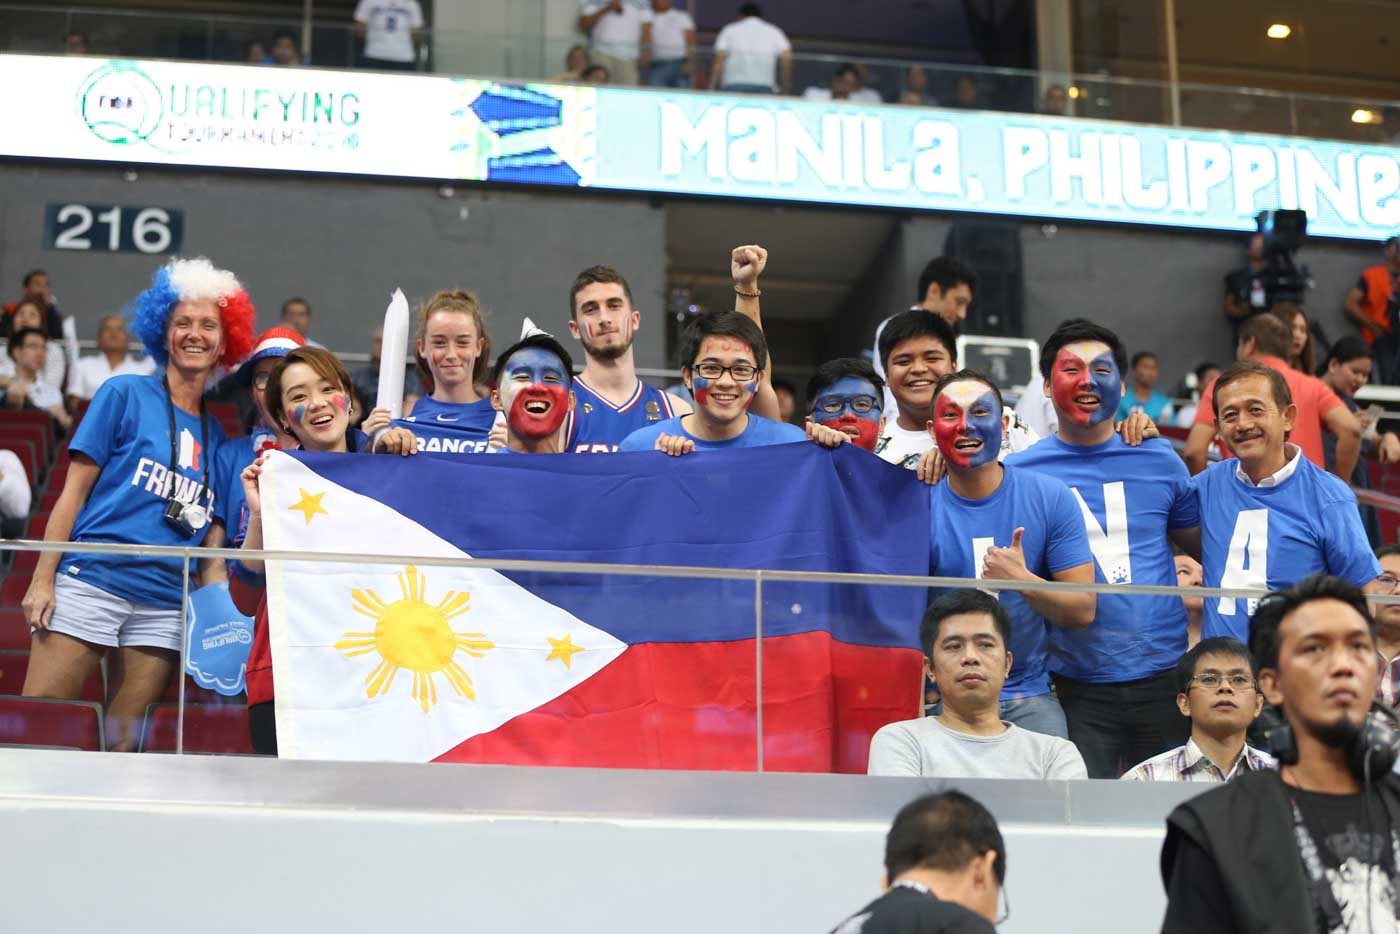 IN PHOTOS: In France setback, Gilas’ 6th man still proves memorable